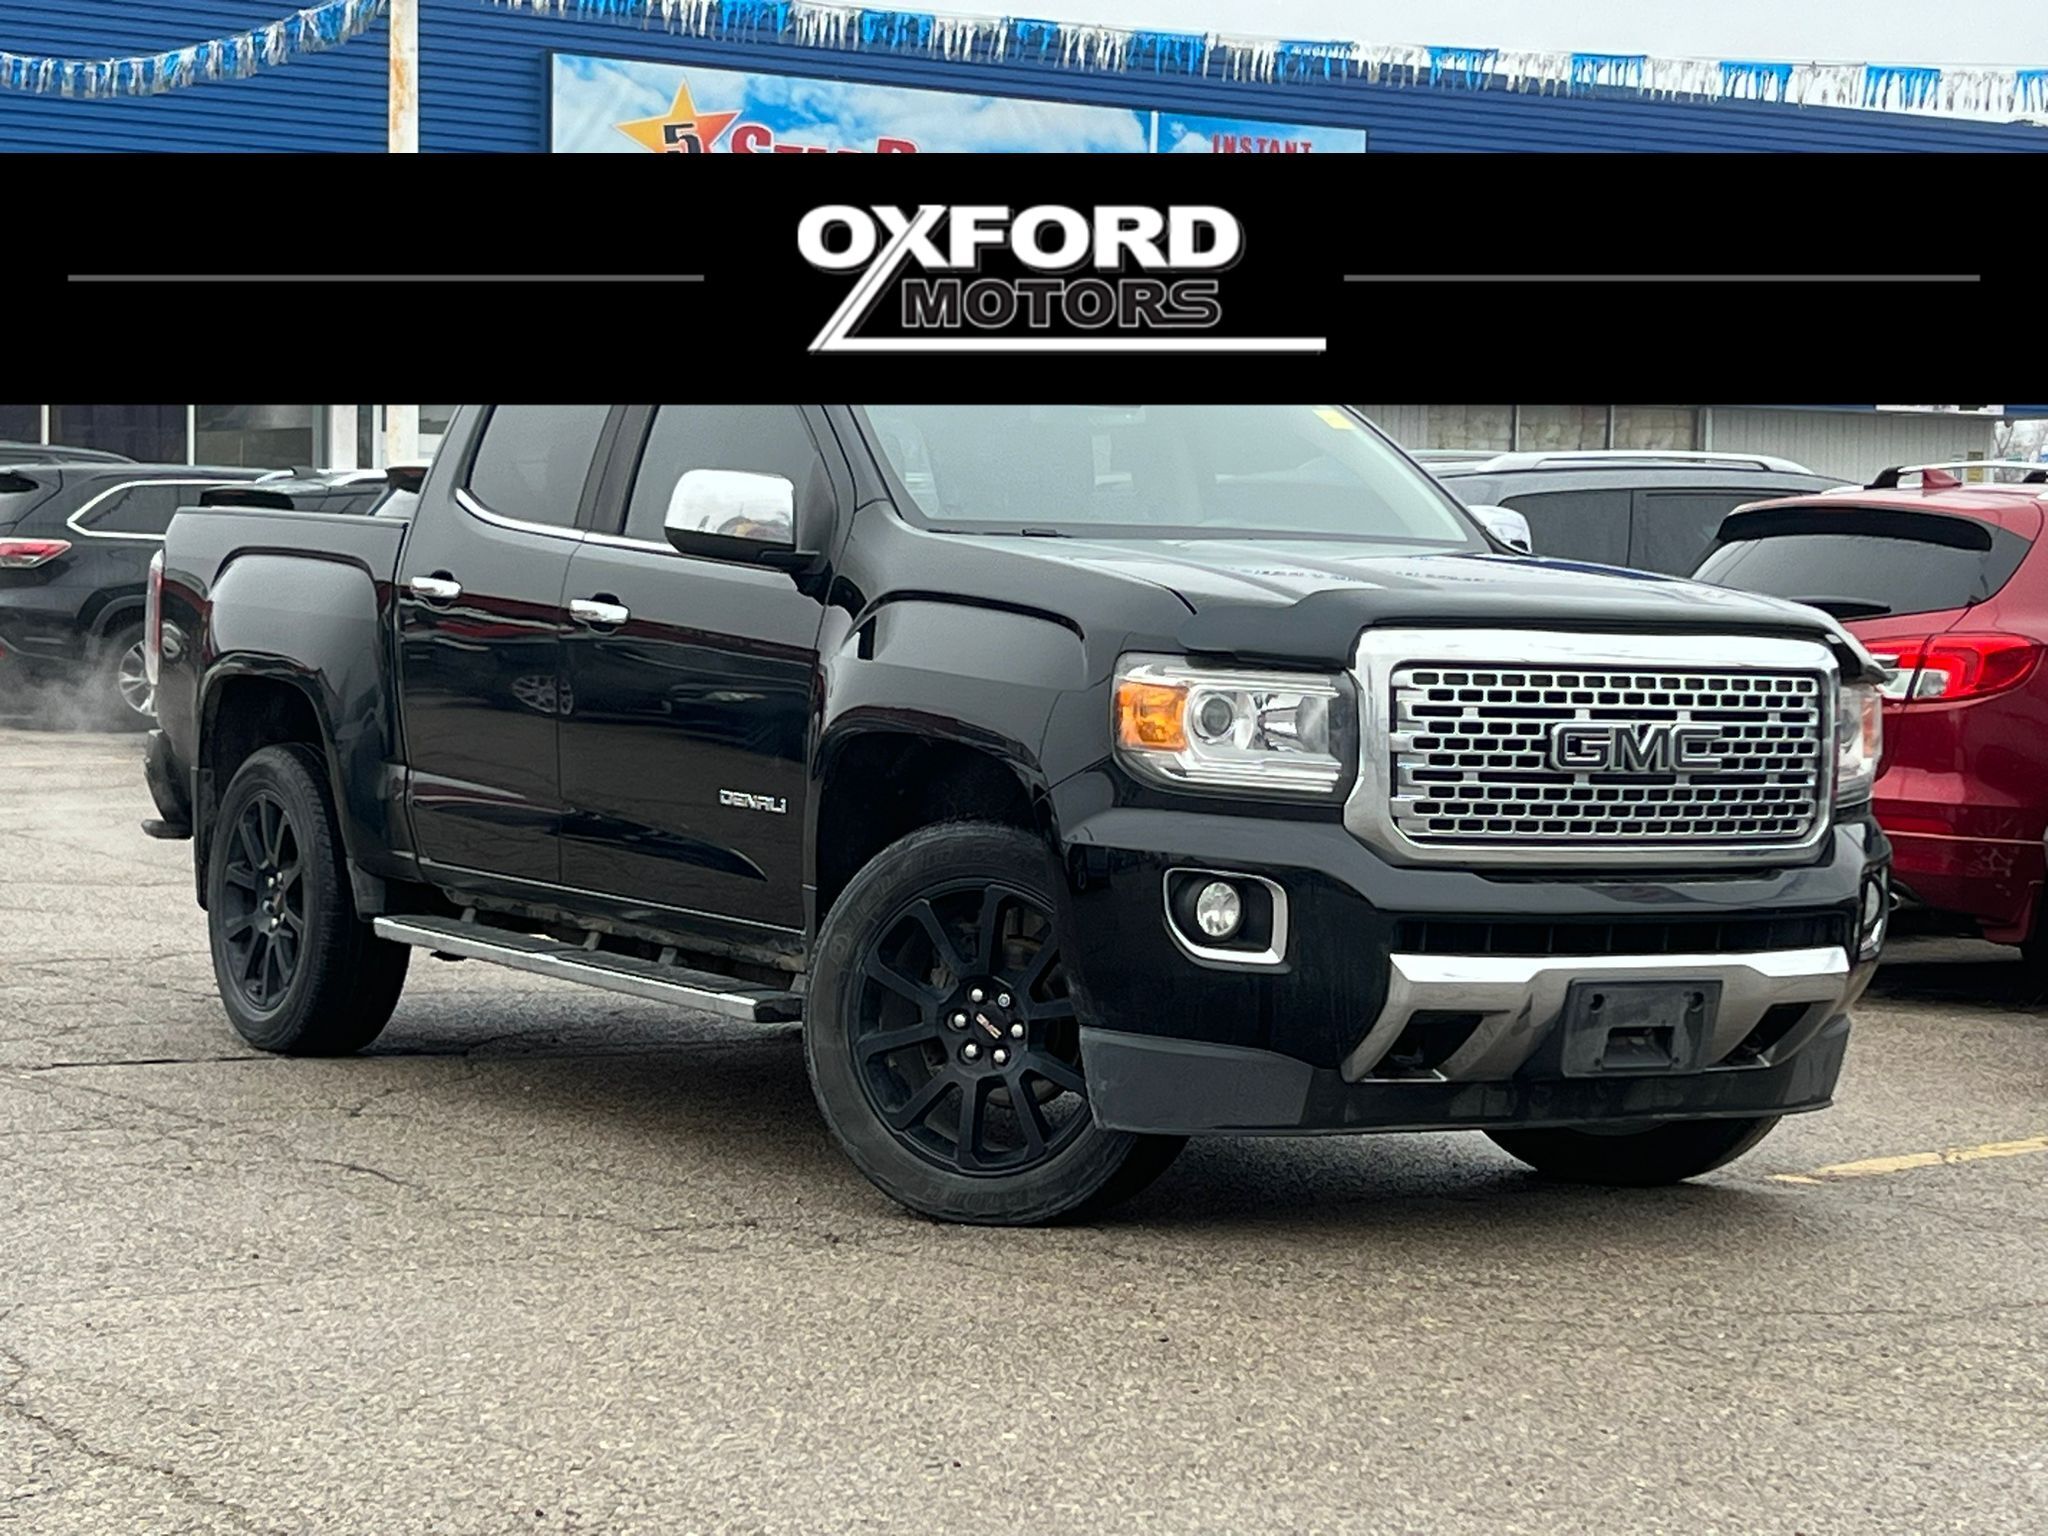 2018 GMC Canyon NAV LEATHER H-SEATS LOADED! WE FINANCE ALL CREDIT!